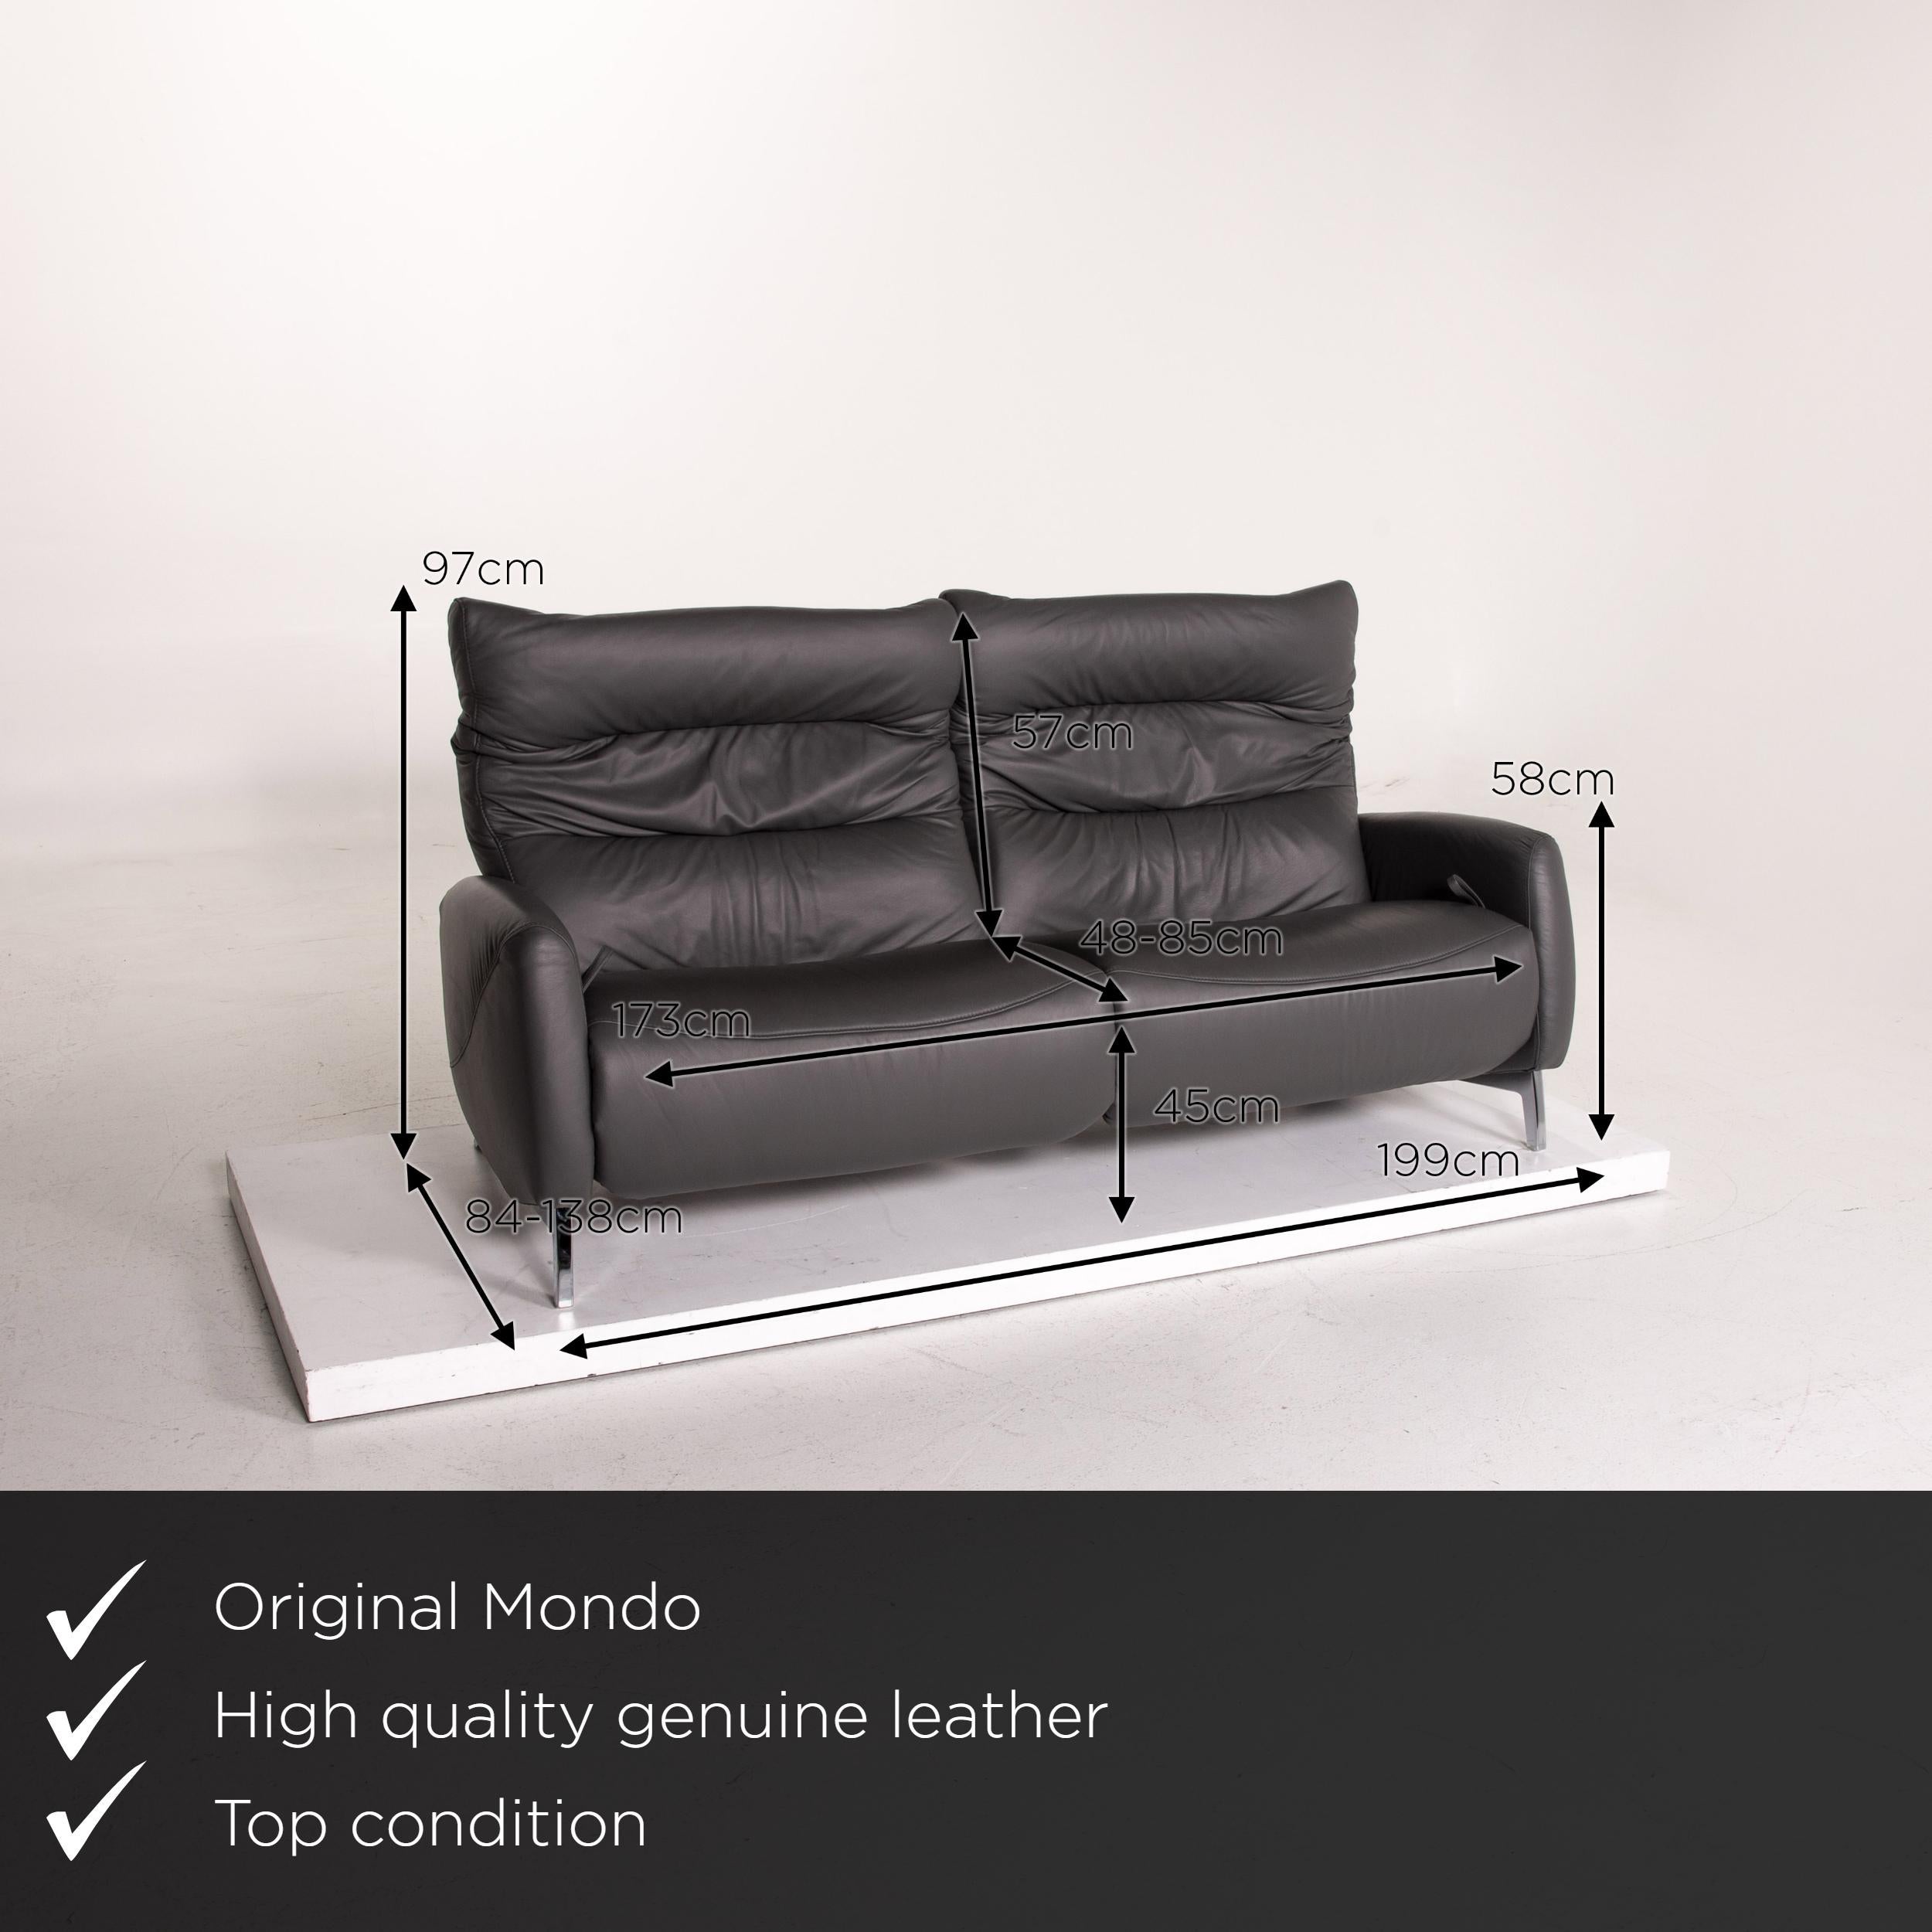 We present to you a Mondo Recero leather sofa gray two-seat function relax function couch.
  
 

 Product measurements in centimeters:
 

Depth 84
Widt: 199
Height 97
Seat height 45
Rest height 58
Seat depth 48
Seat width 173
Back